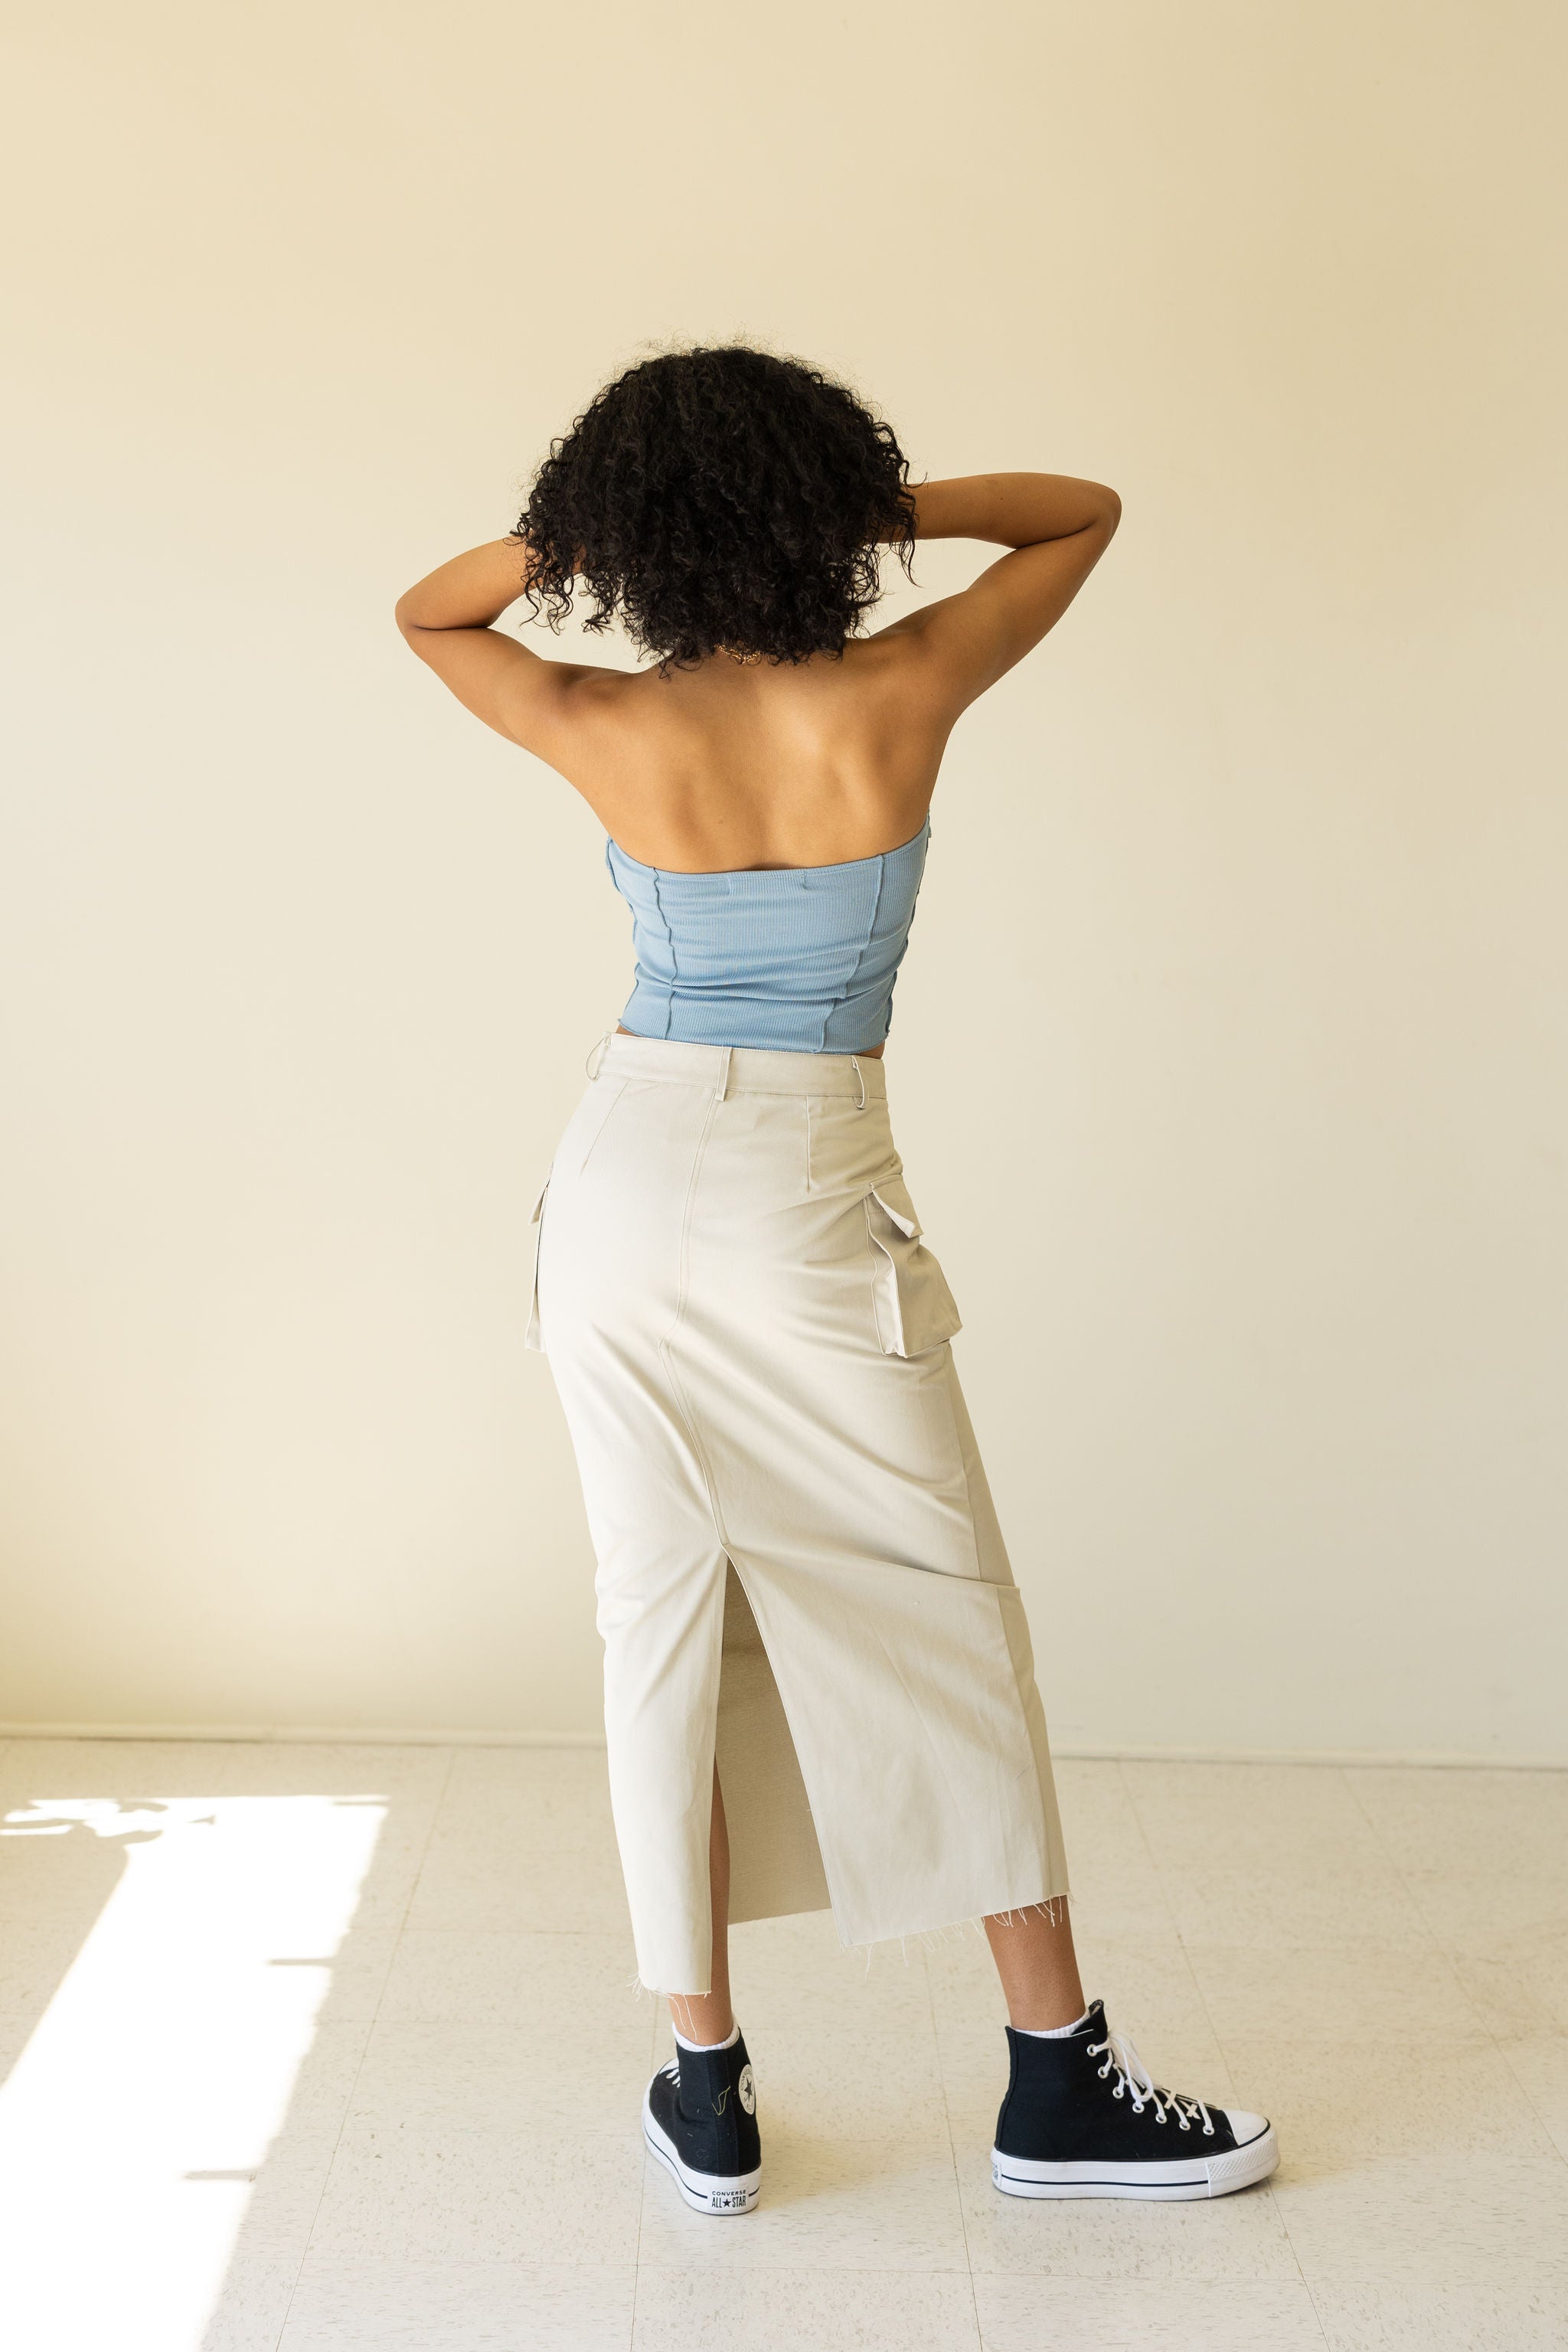 Knowing You Midi Skirt by For Good